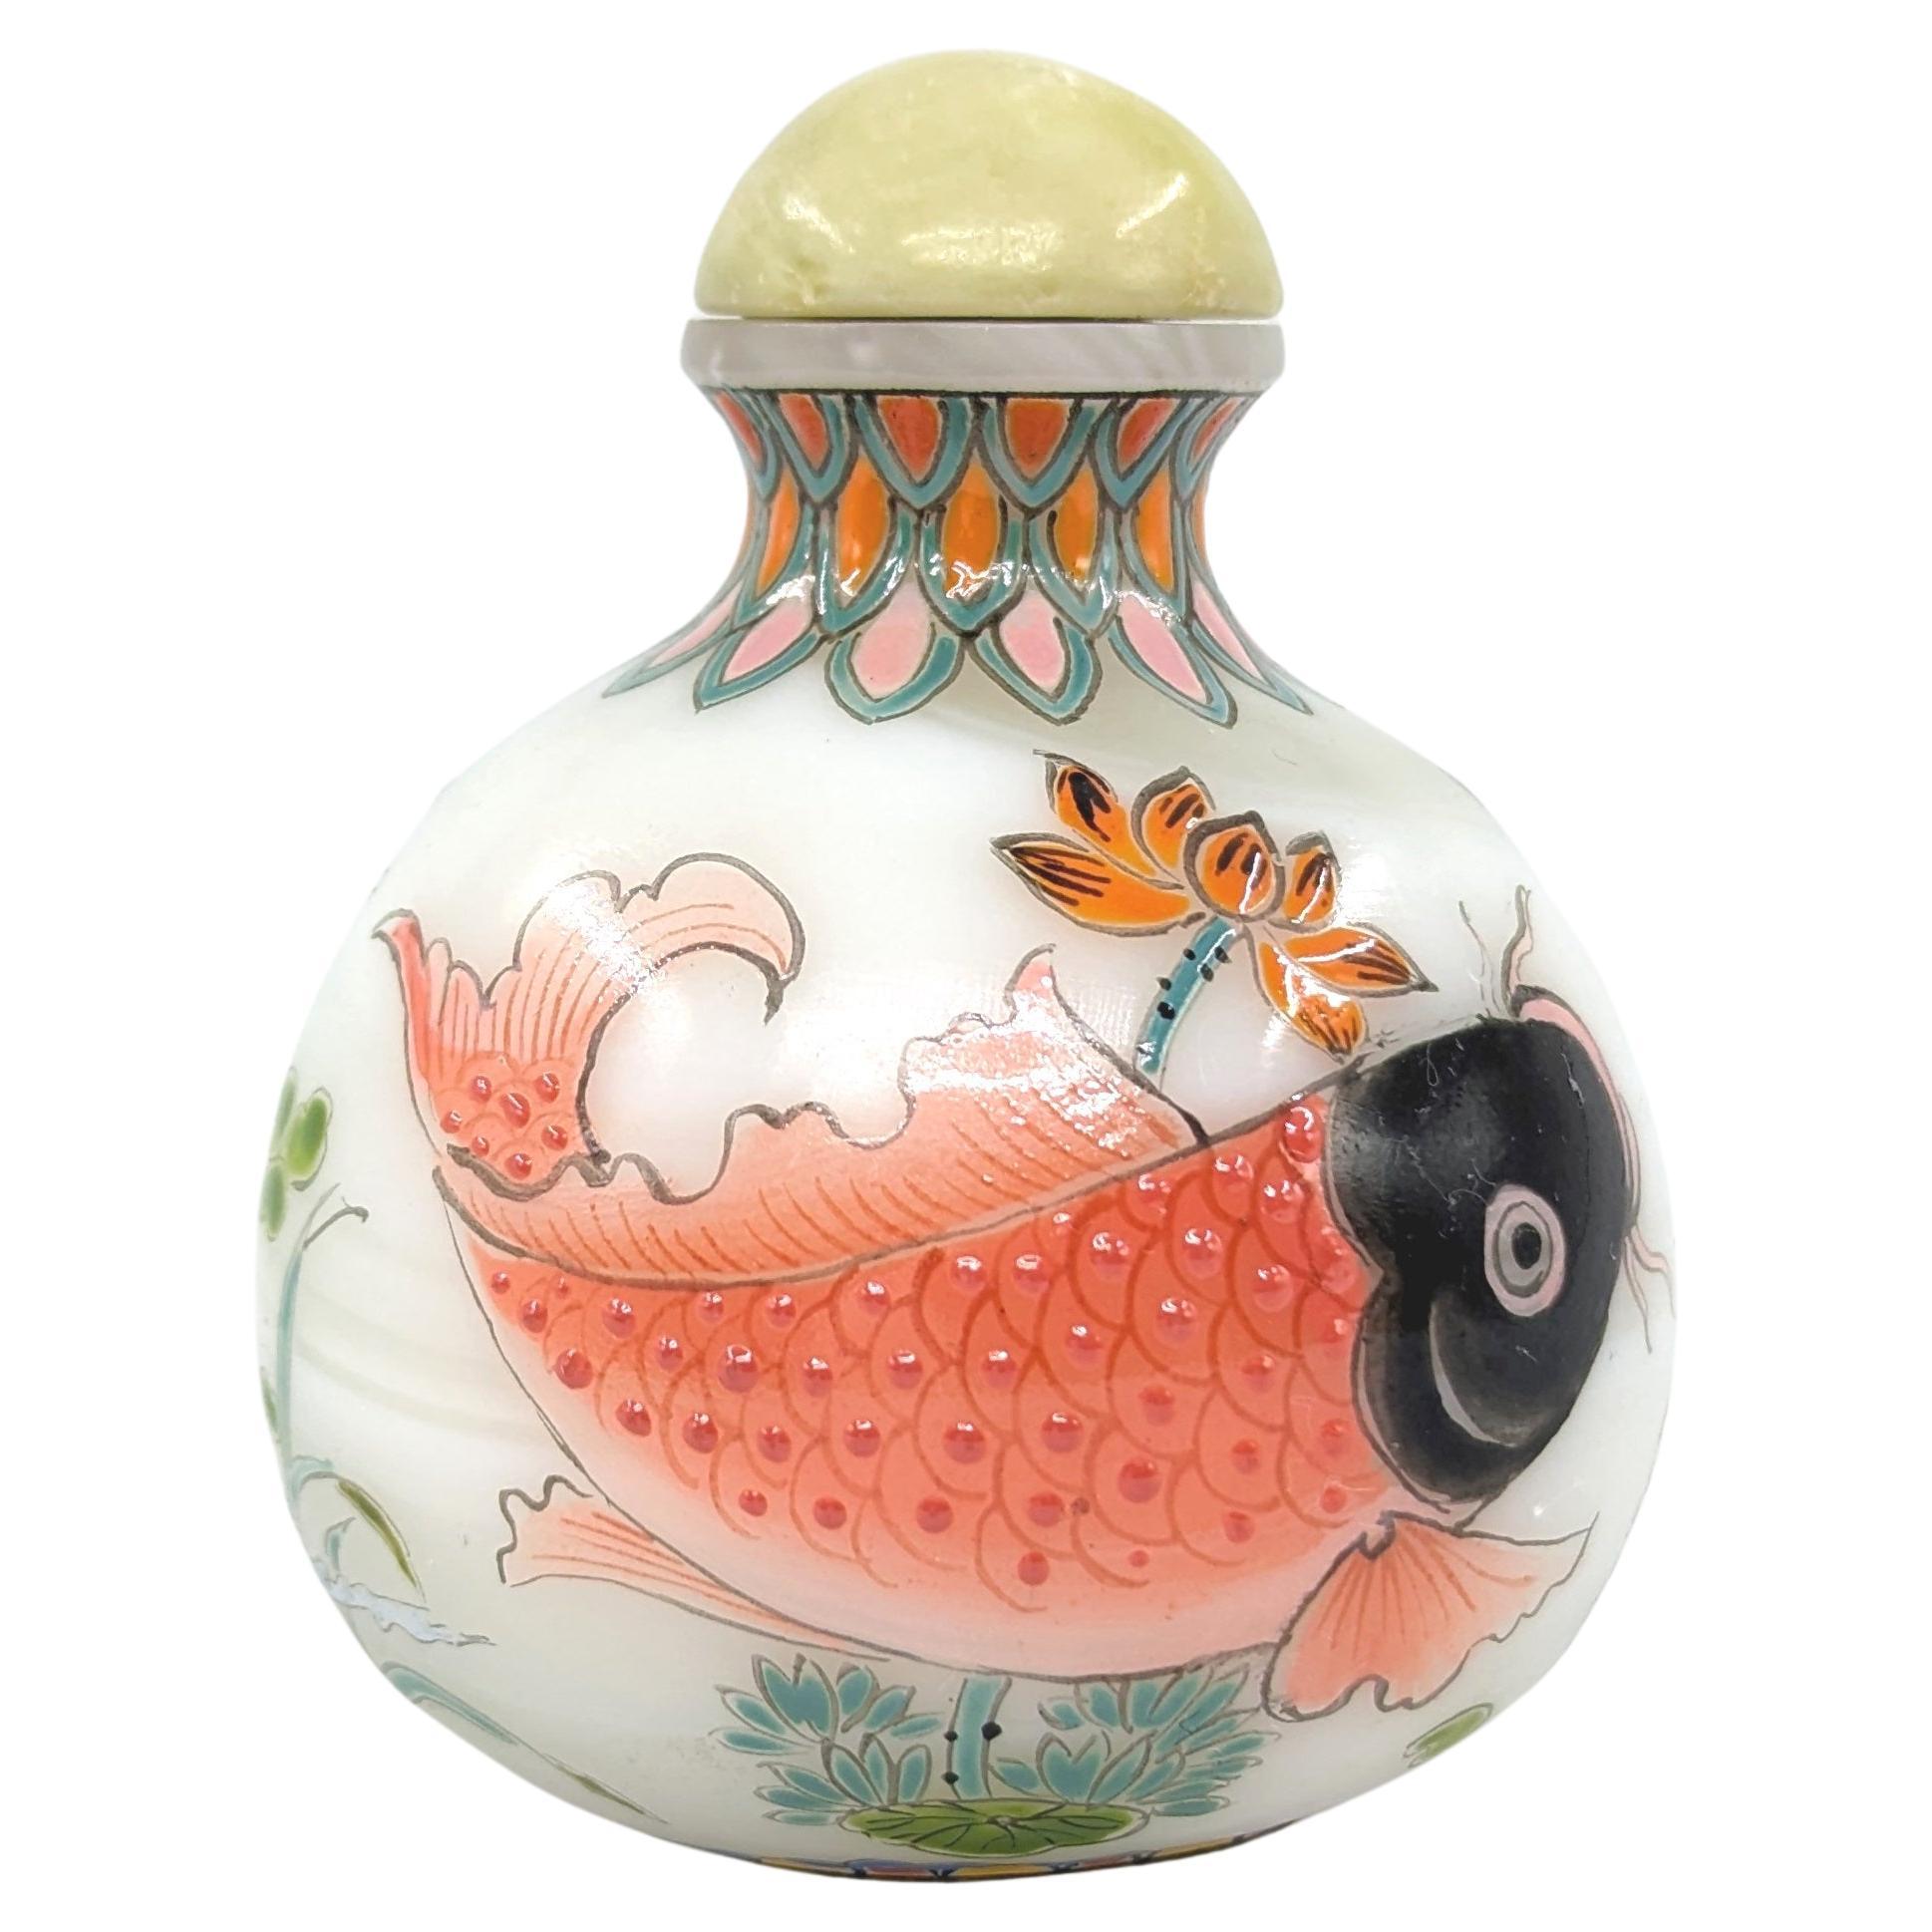 Introducing a vibrant piece of late 20th-century craftsmanship, this snuff bottle stands as a fine example of the period's artistry. The bottle, exhibiting a pleasing globular form, is a harmonious blend of tradition and modernity, offering a